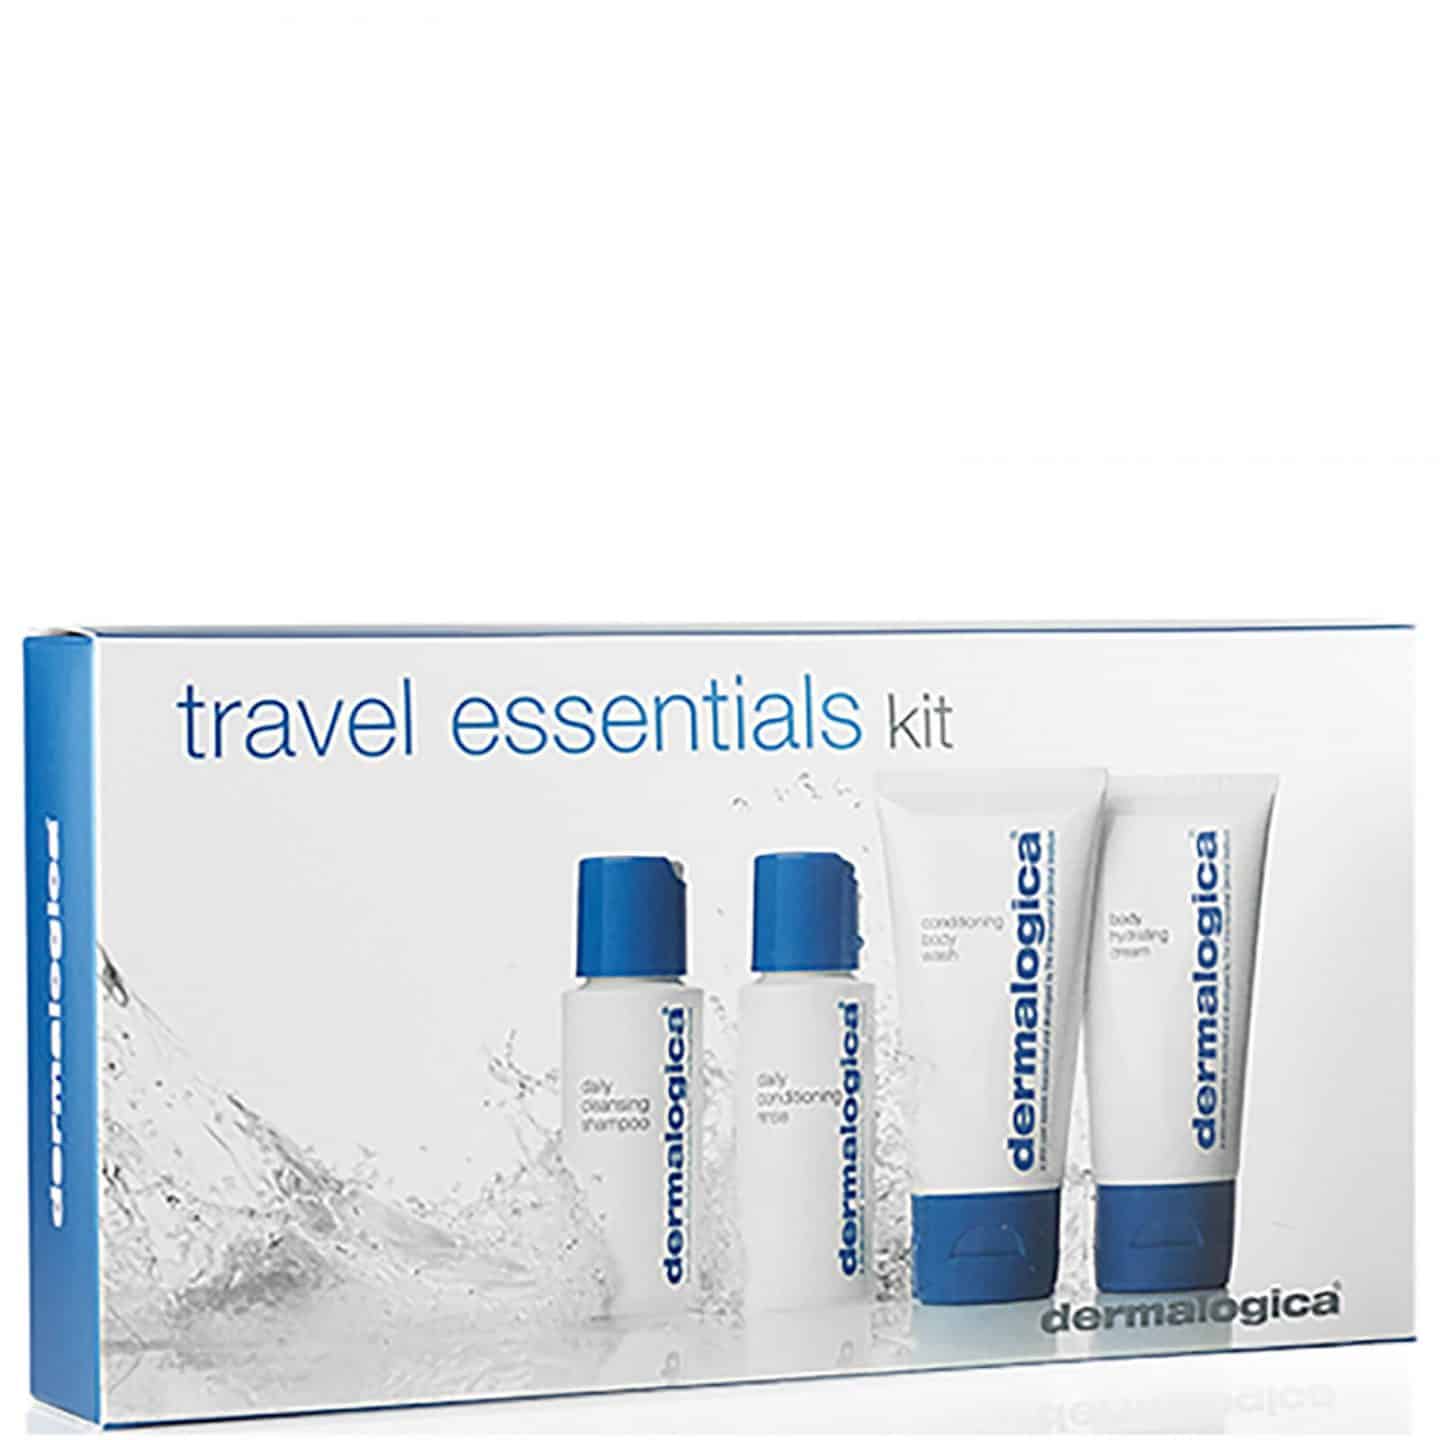 Skincare Travel Essentials - Glow on the Go with these Travel Skincare Sets - Find the best skincare travel kit for your skin type! Both high end and drugstore! Skincare tips, Skincare products for all. #skincare #beauty #makeup #traveltips #longhaul #shorthaul #packingtip #oily #normal #combination #dry #sensitive #acne